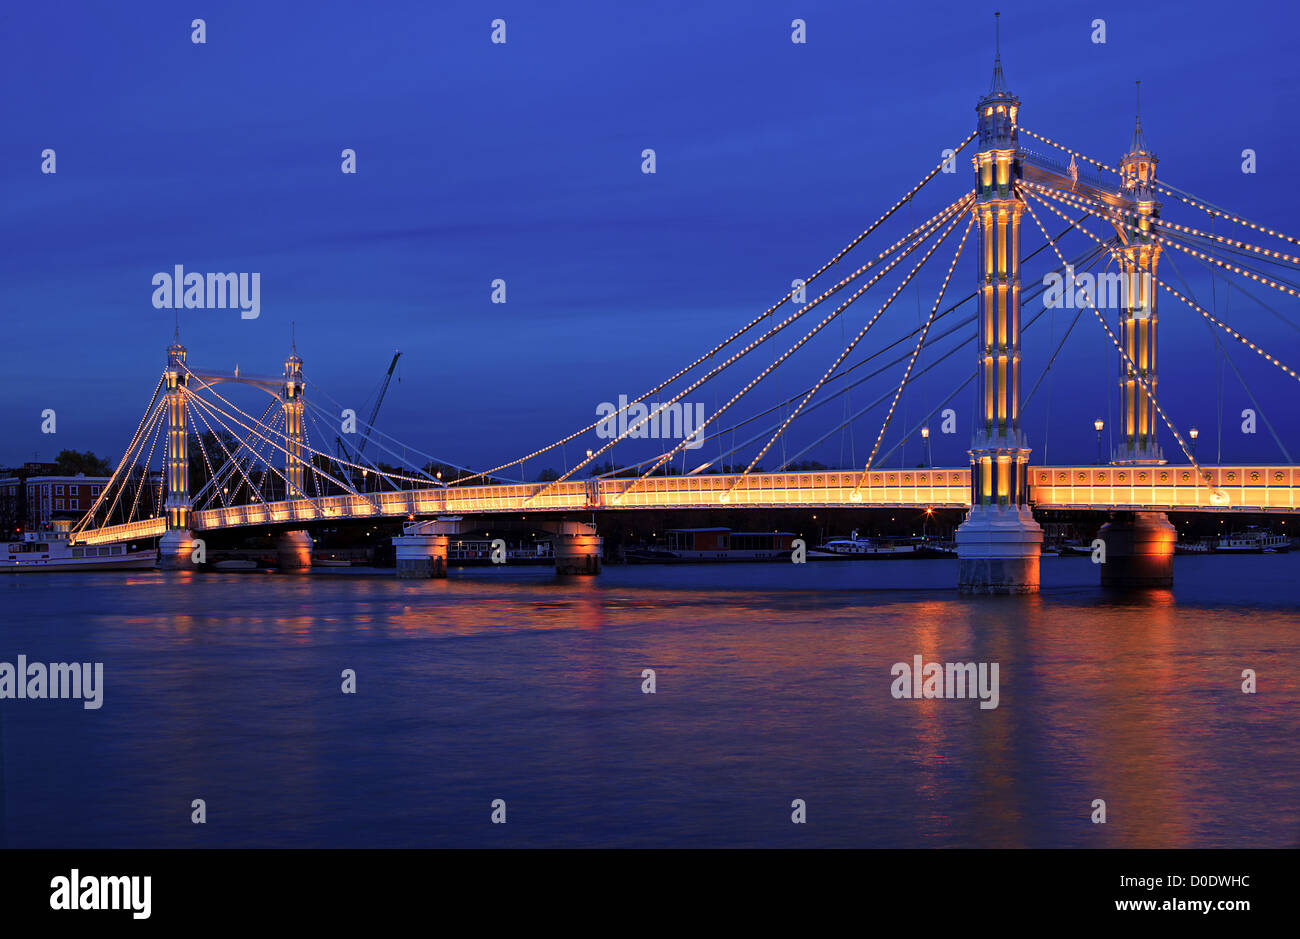 Albert Bridge - London. This image was taken in the blue hour from the ...